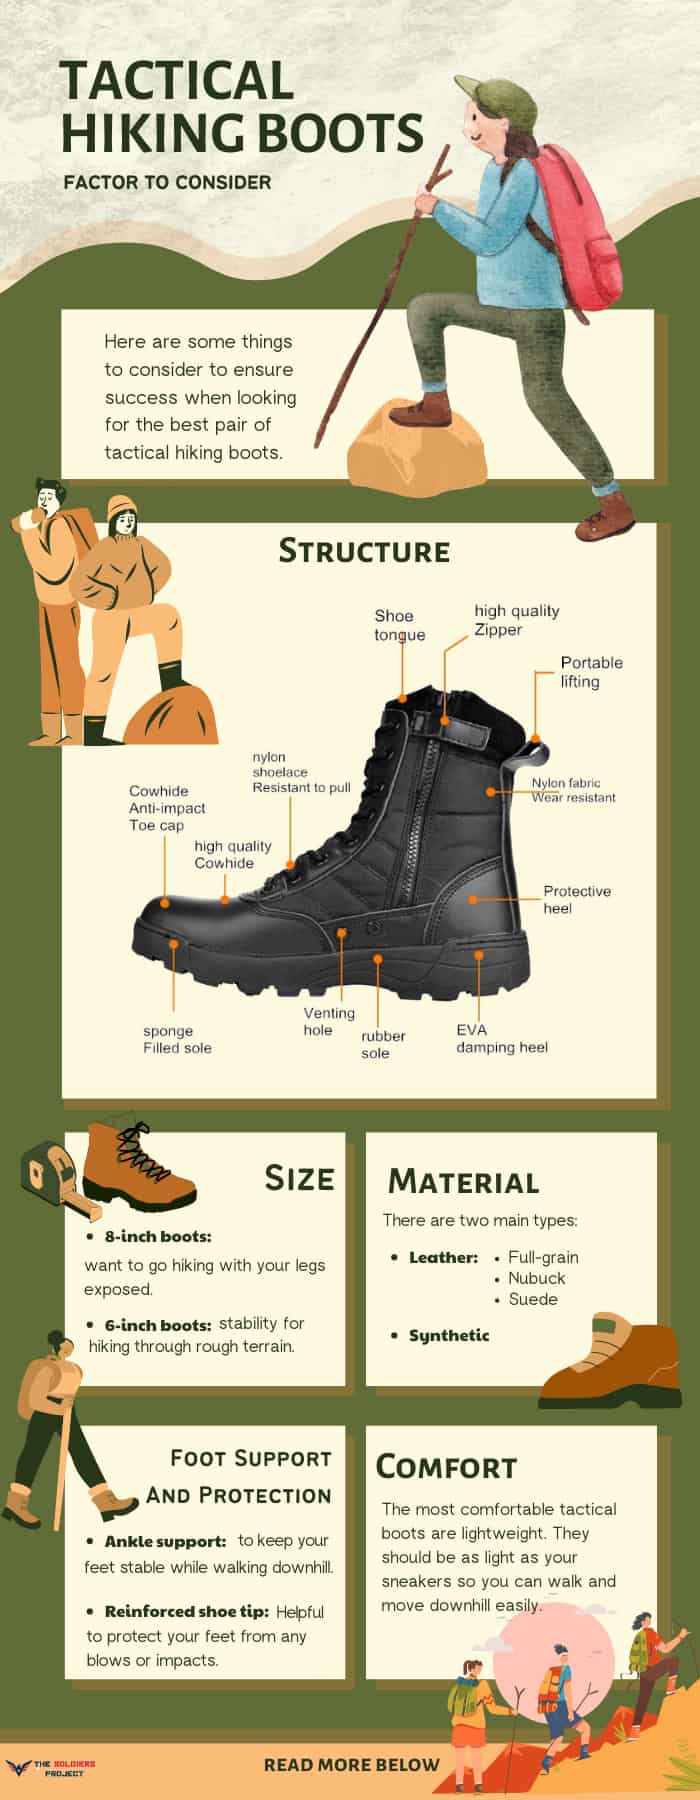 comfortable-tactical-boots